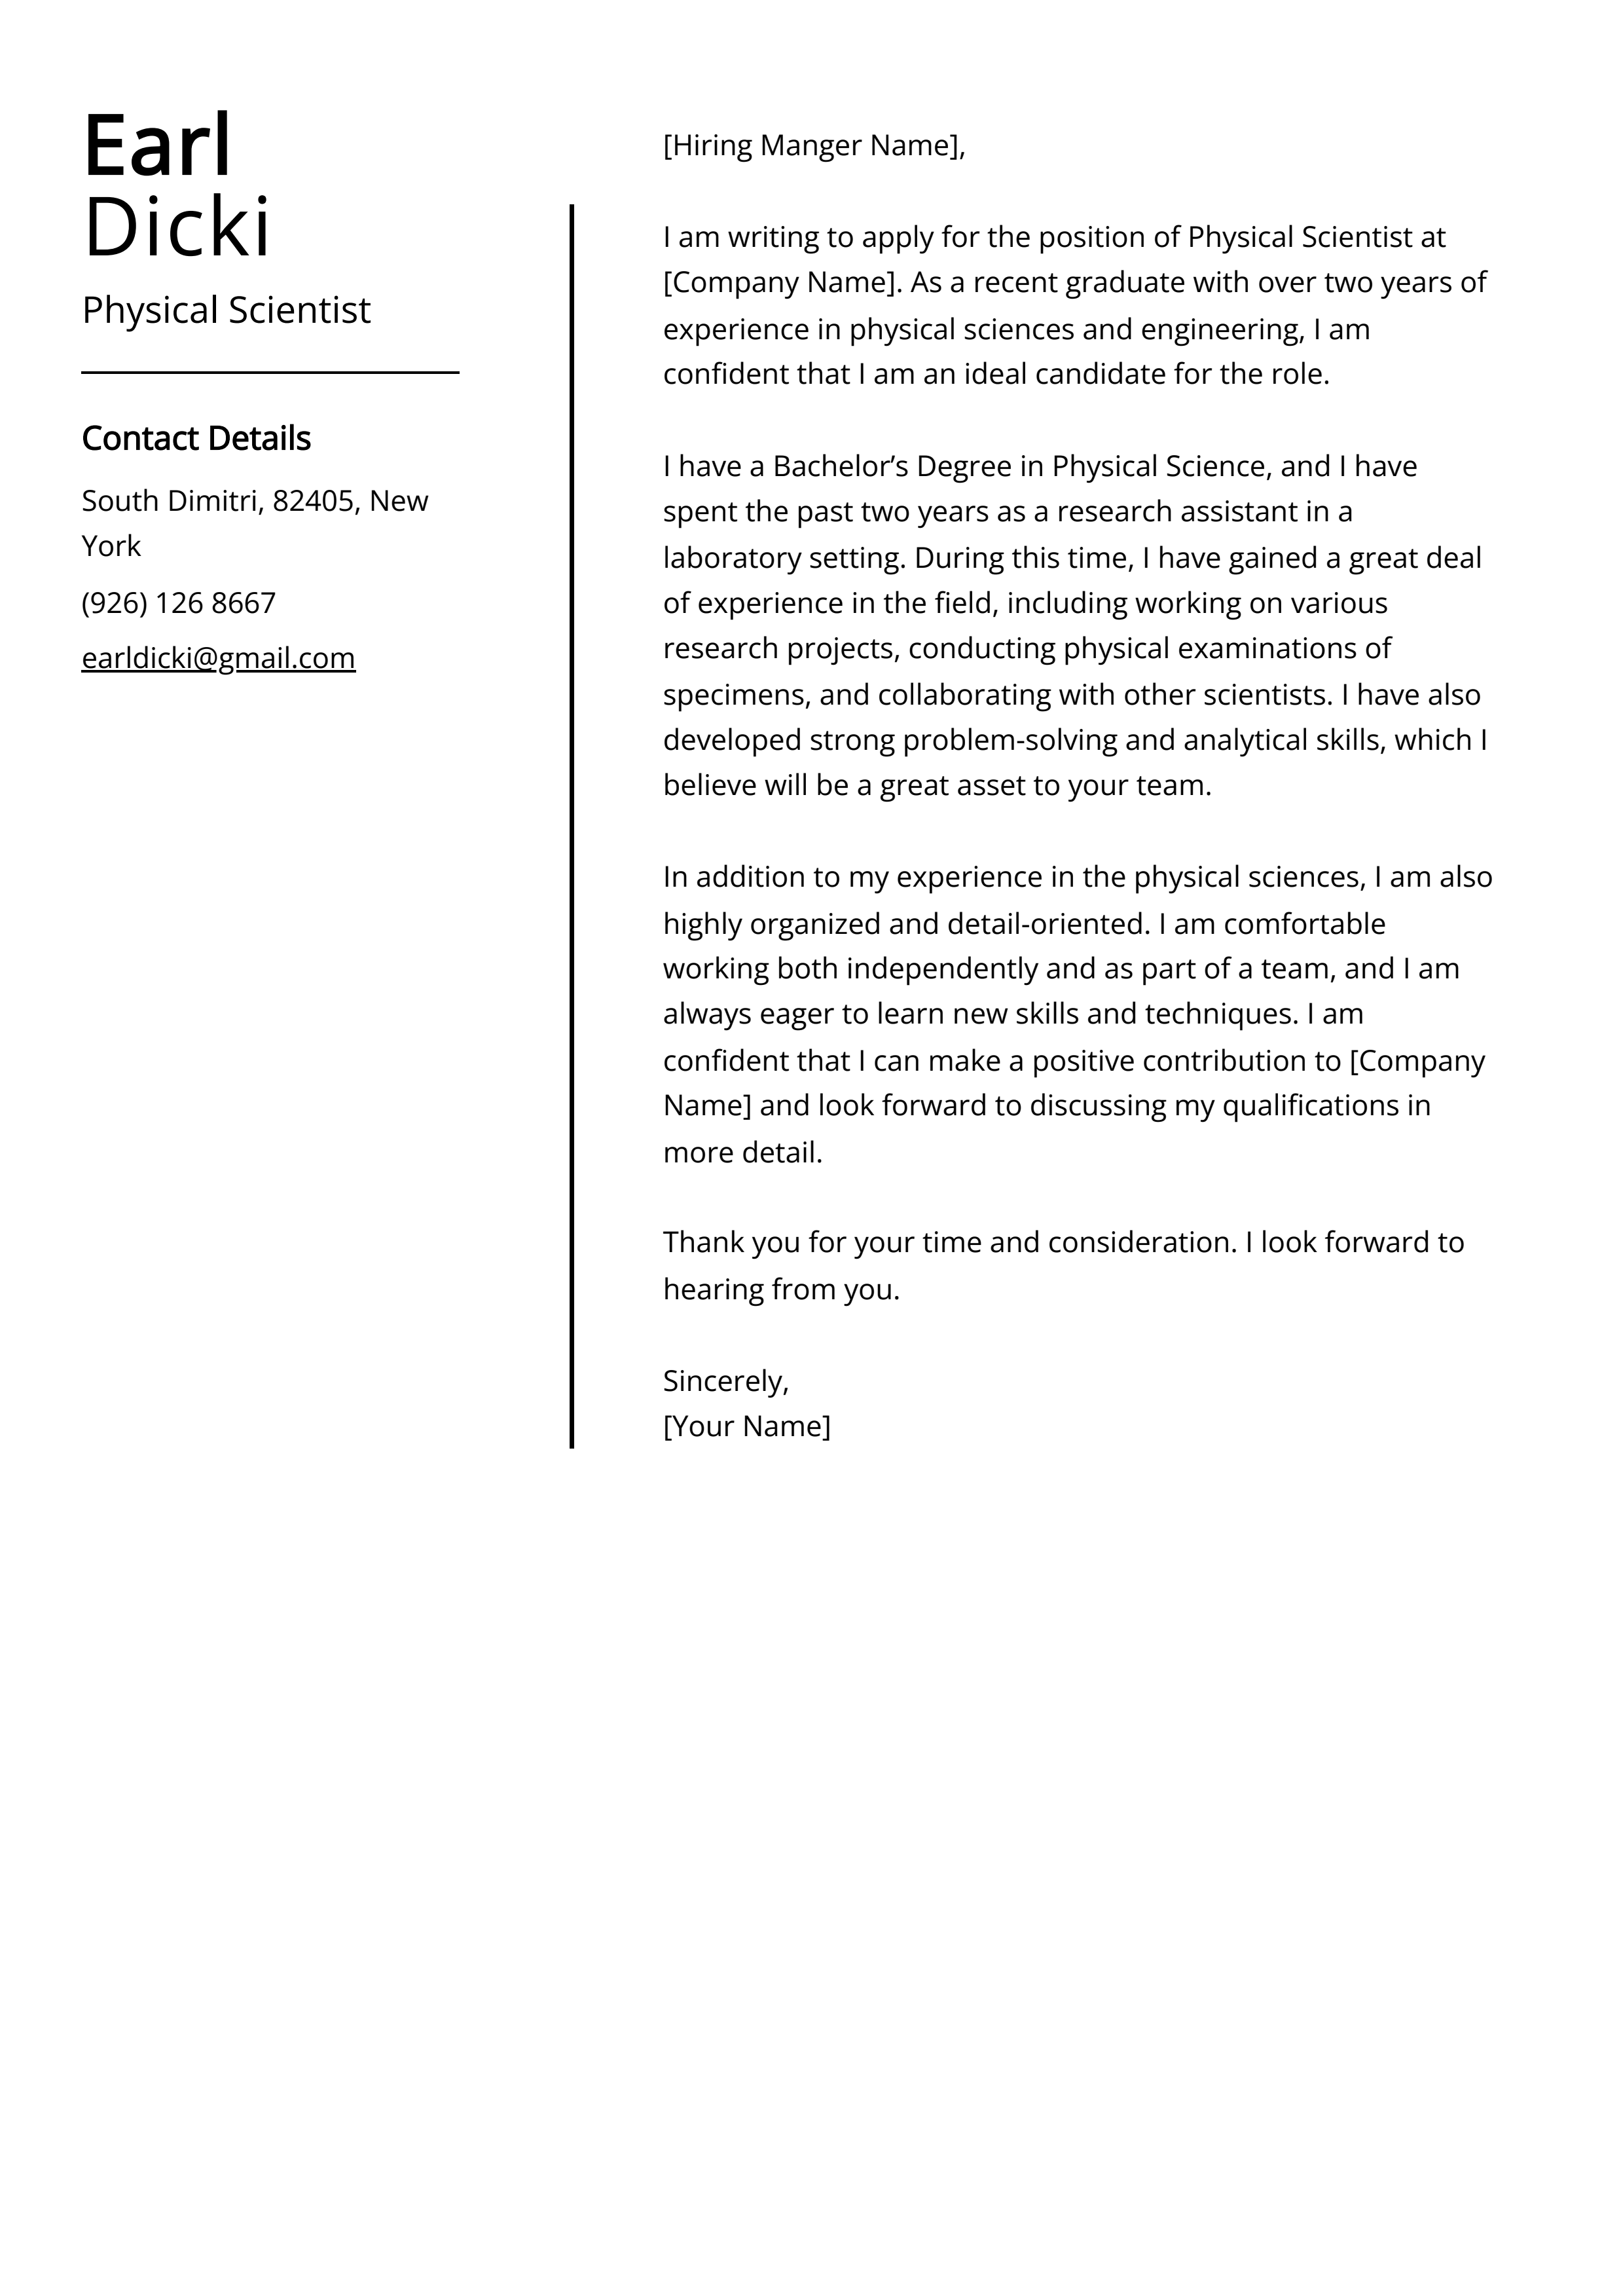 Physical Scientist Cover Letter Example